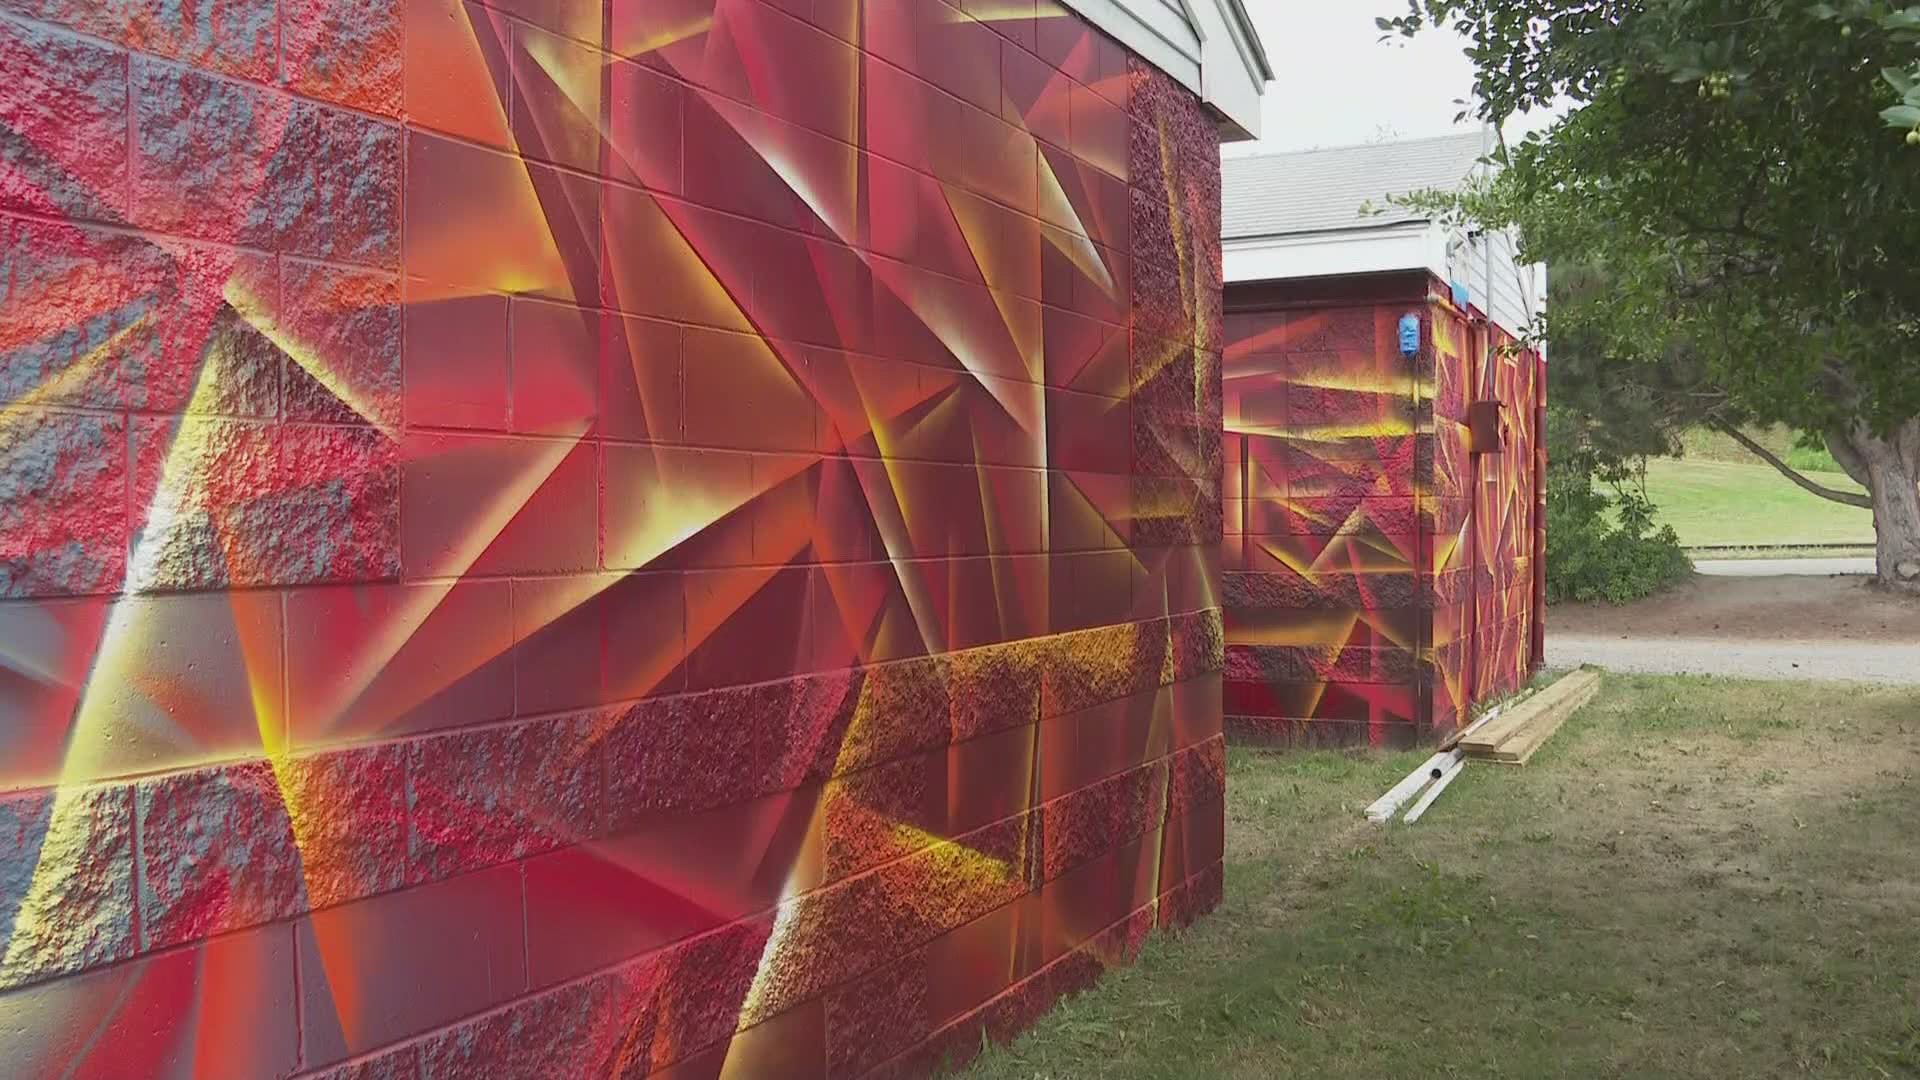 Mural artist Jared Goulette, aka 'The Color Wizard', is collaborating with Portland officials to spruce up the city's landscape.